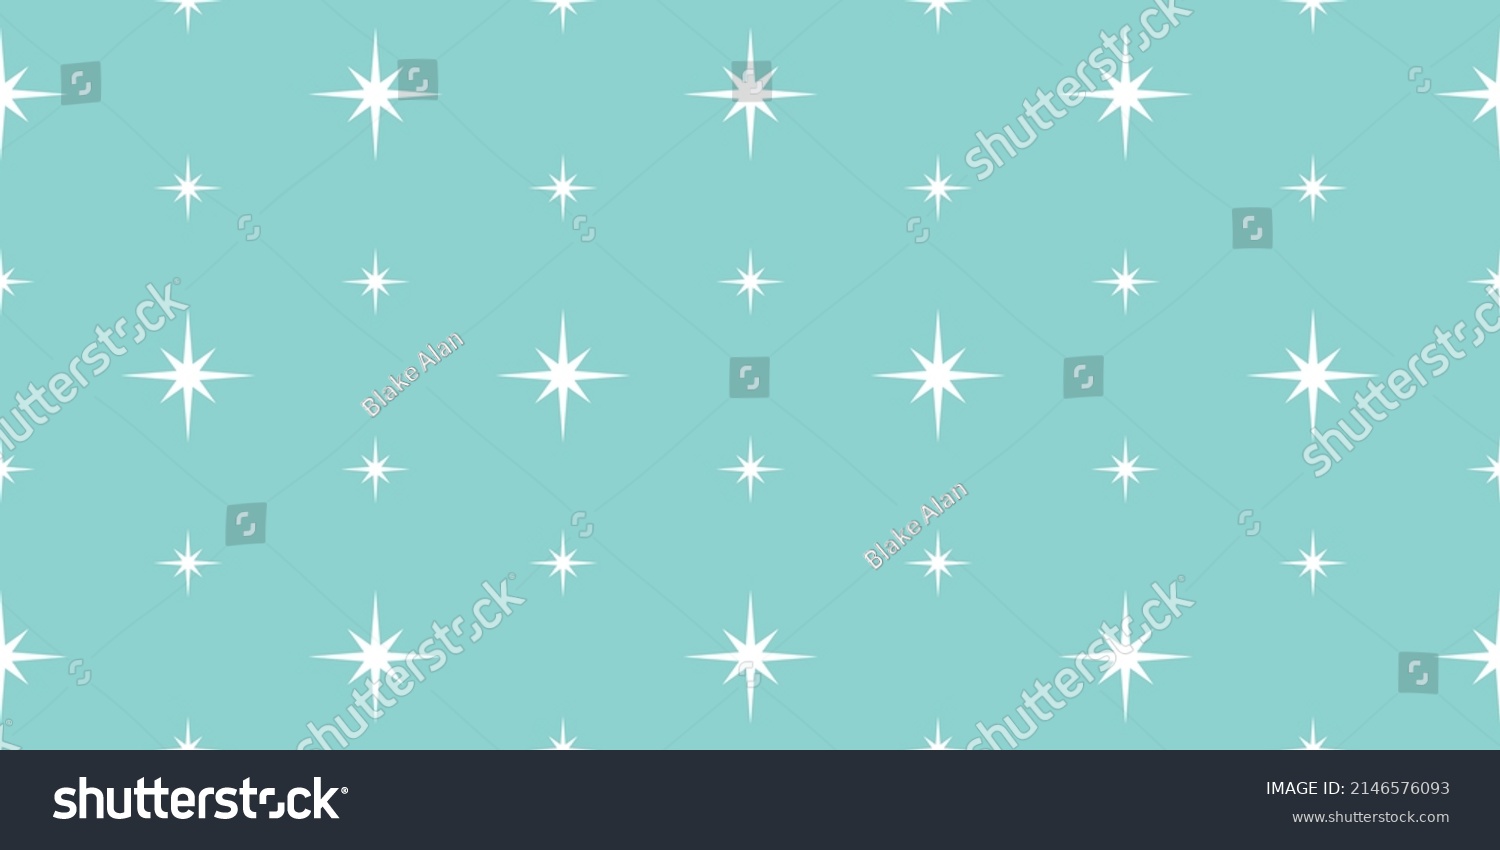 SVG of Retro 50s Starburst Pattern in Vintage Turquoise | Seamless Vector Wallpaper | Repeating Fifties Atomic Design svg